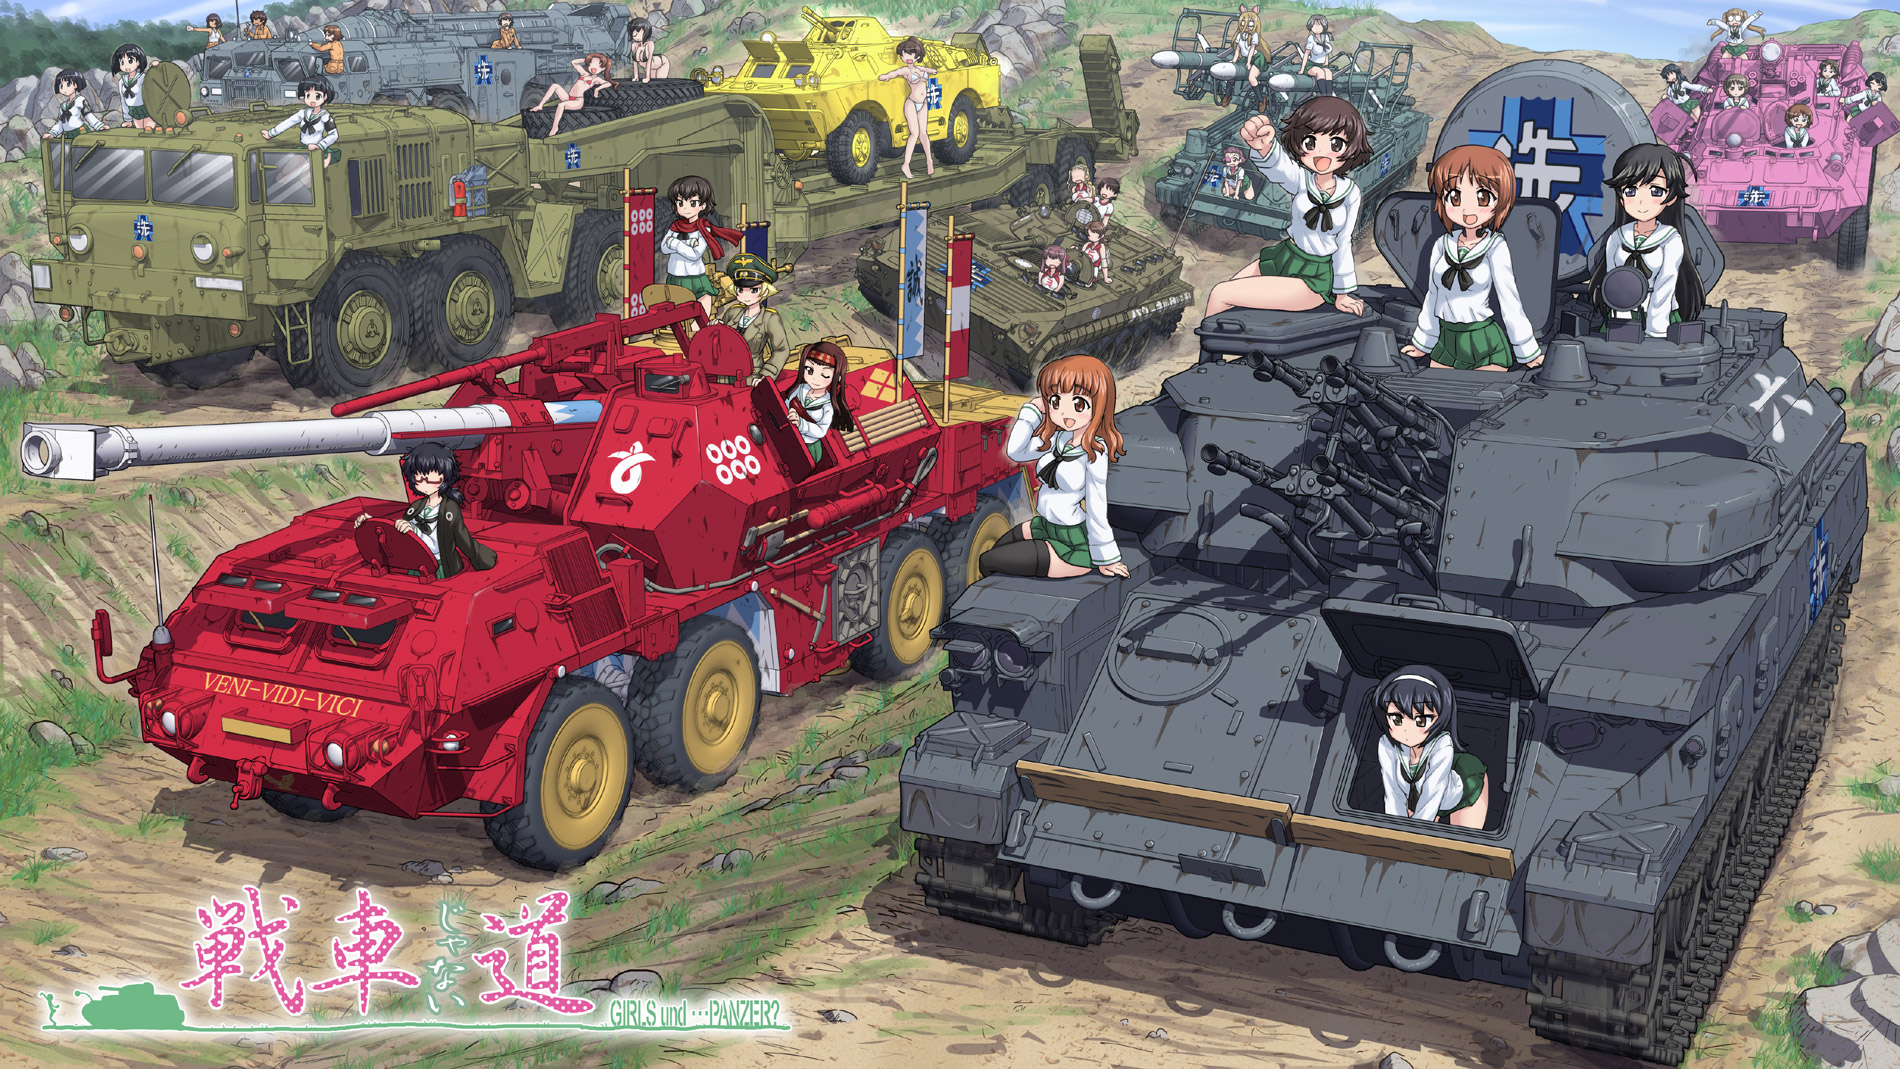 Girls und Panzer gets a Movie but why The jamoe